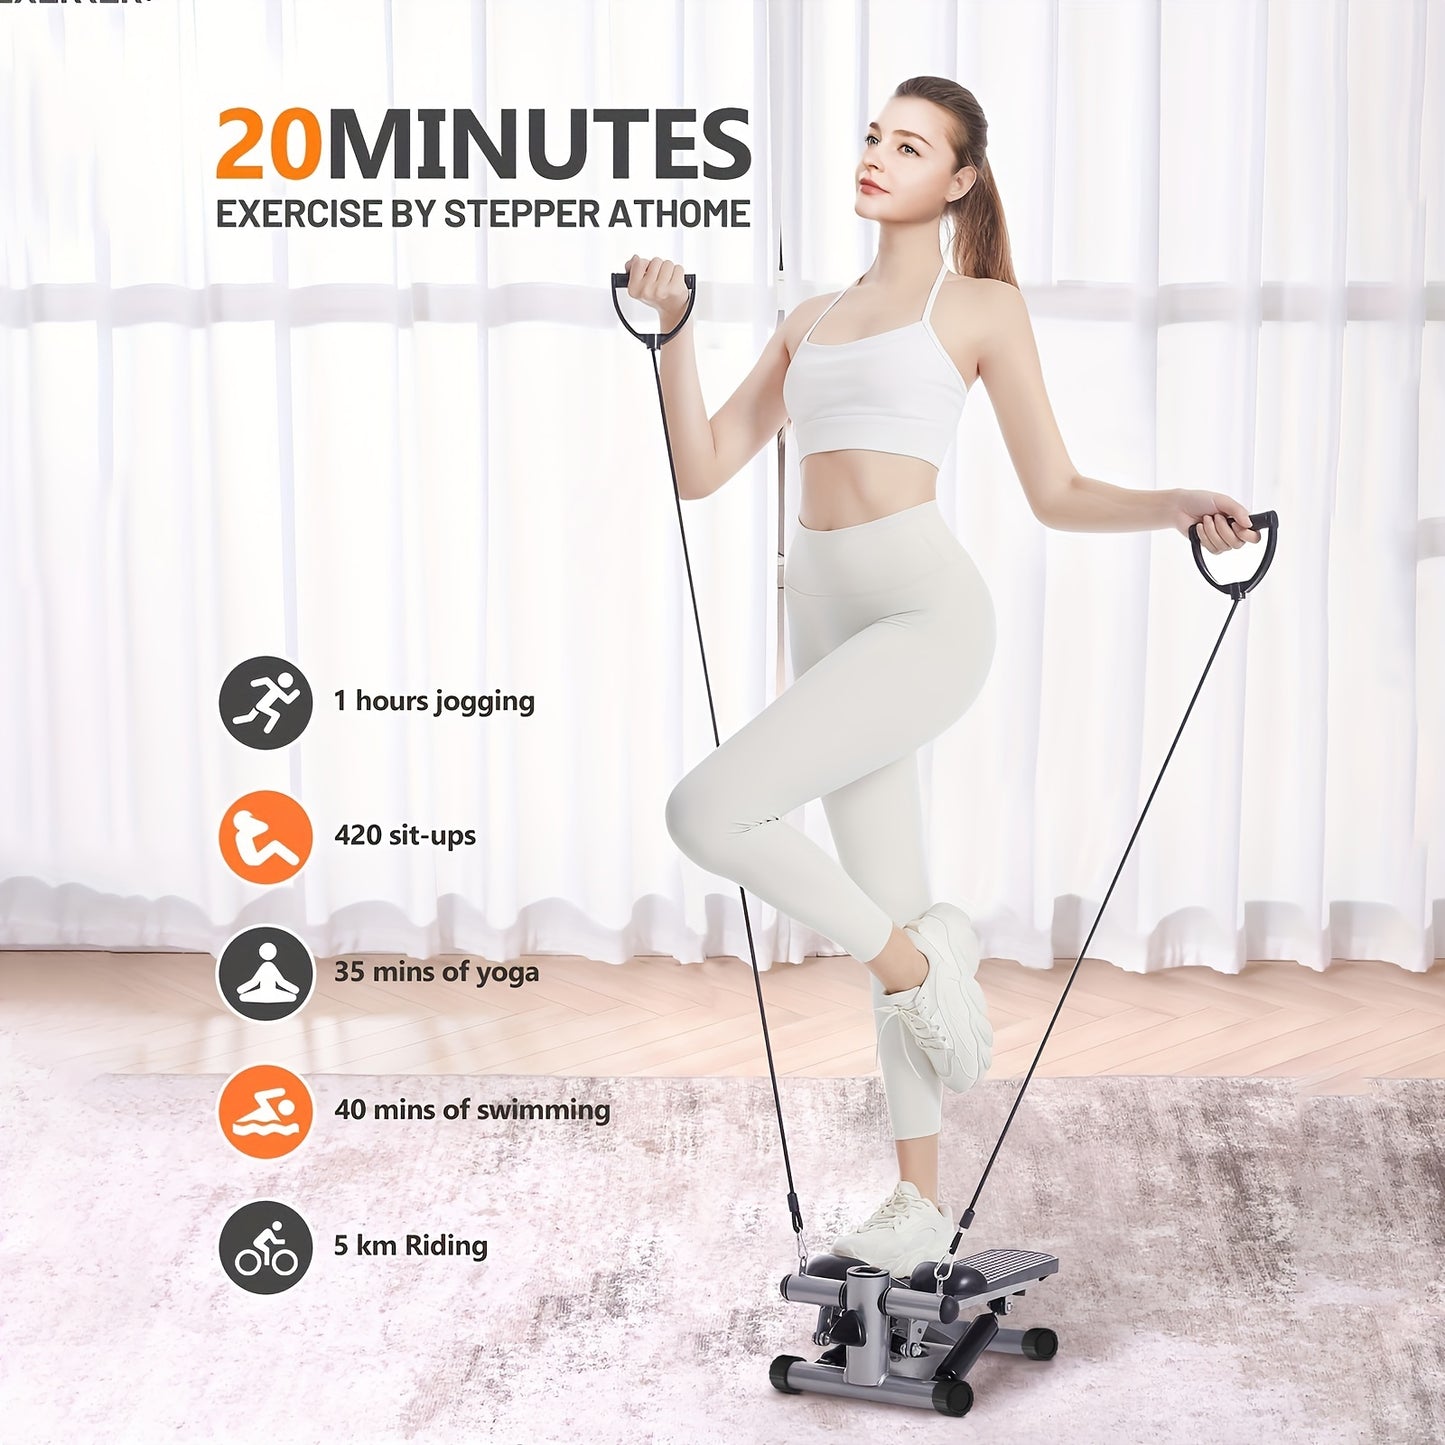 Stepper For Exercise,Mini Stepper With Exercise Equipment For Home Workouts,Hydraulic Fitness Stair Stepper With Resistance Band & Calories Count 350lbs Weight Capacity